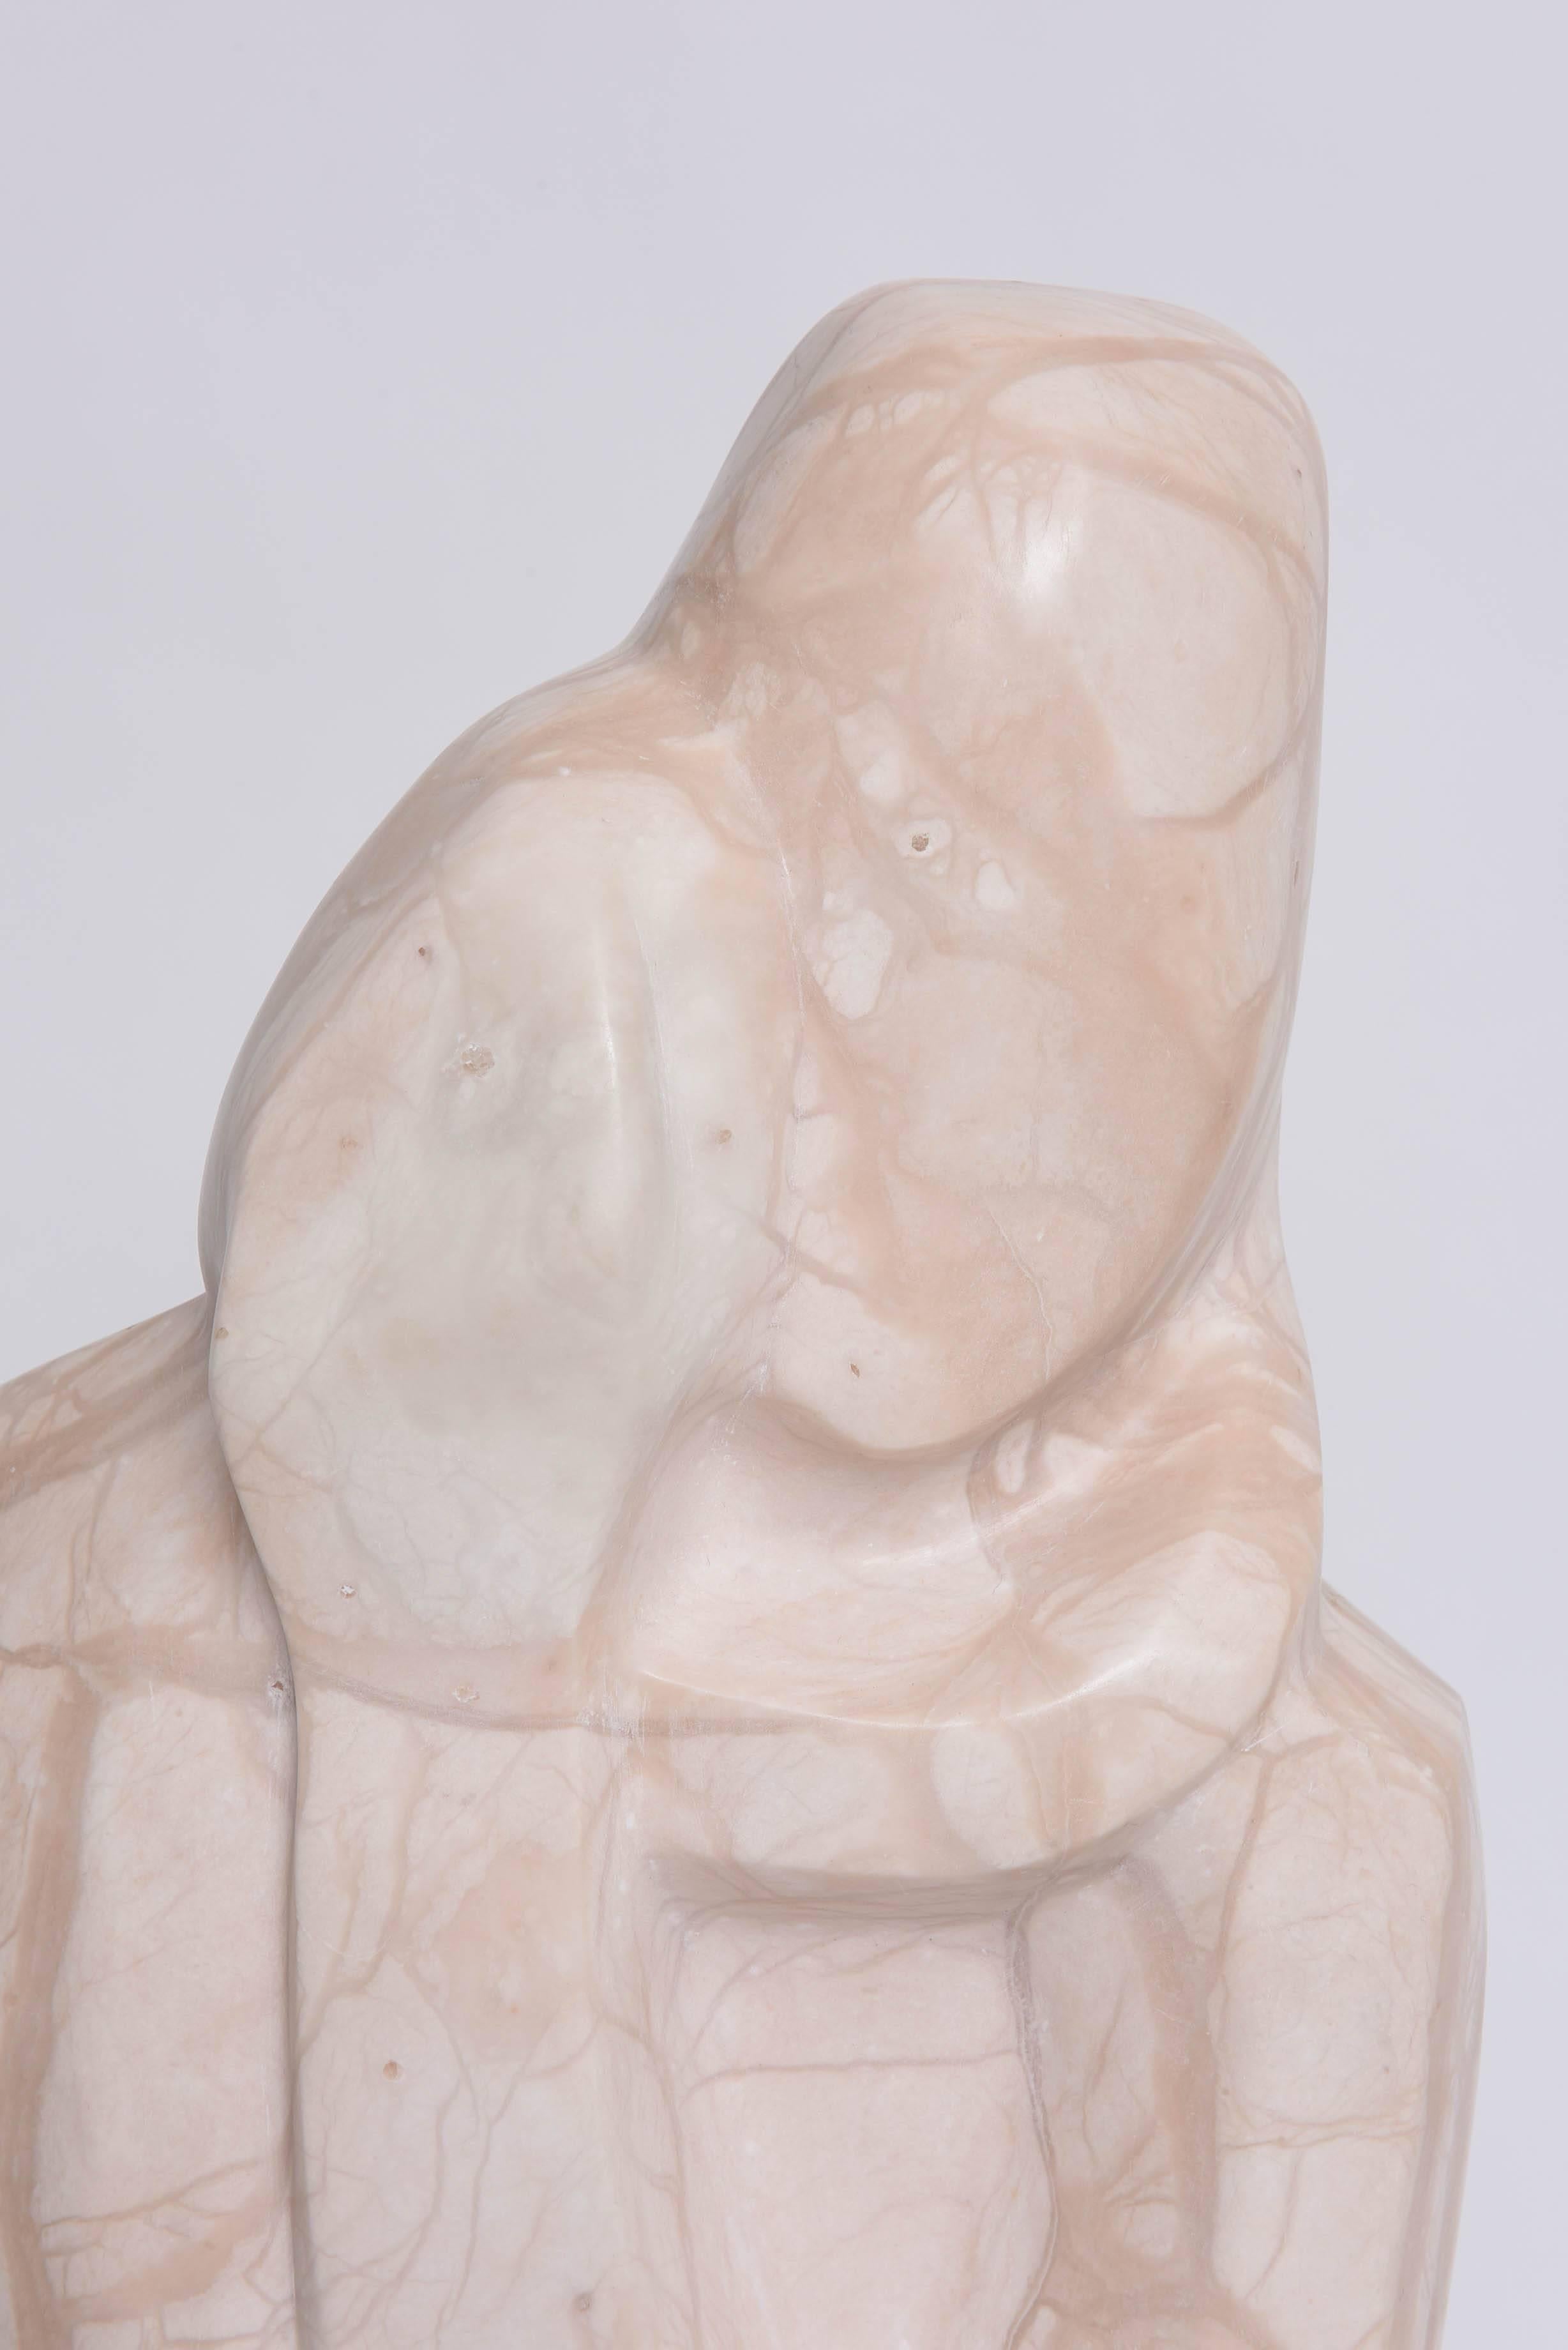 American Delete 4 WIP ------ Marble Sculpture, Mother and Child Embracing, Beatrice Eiges